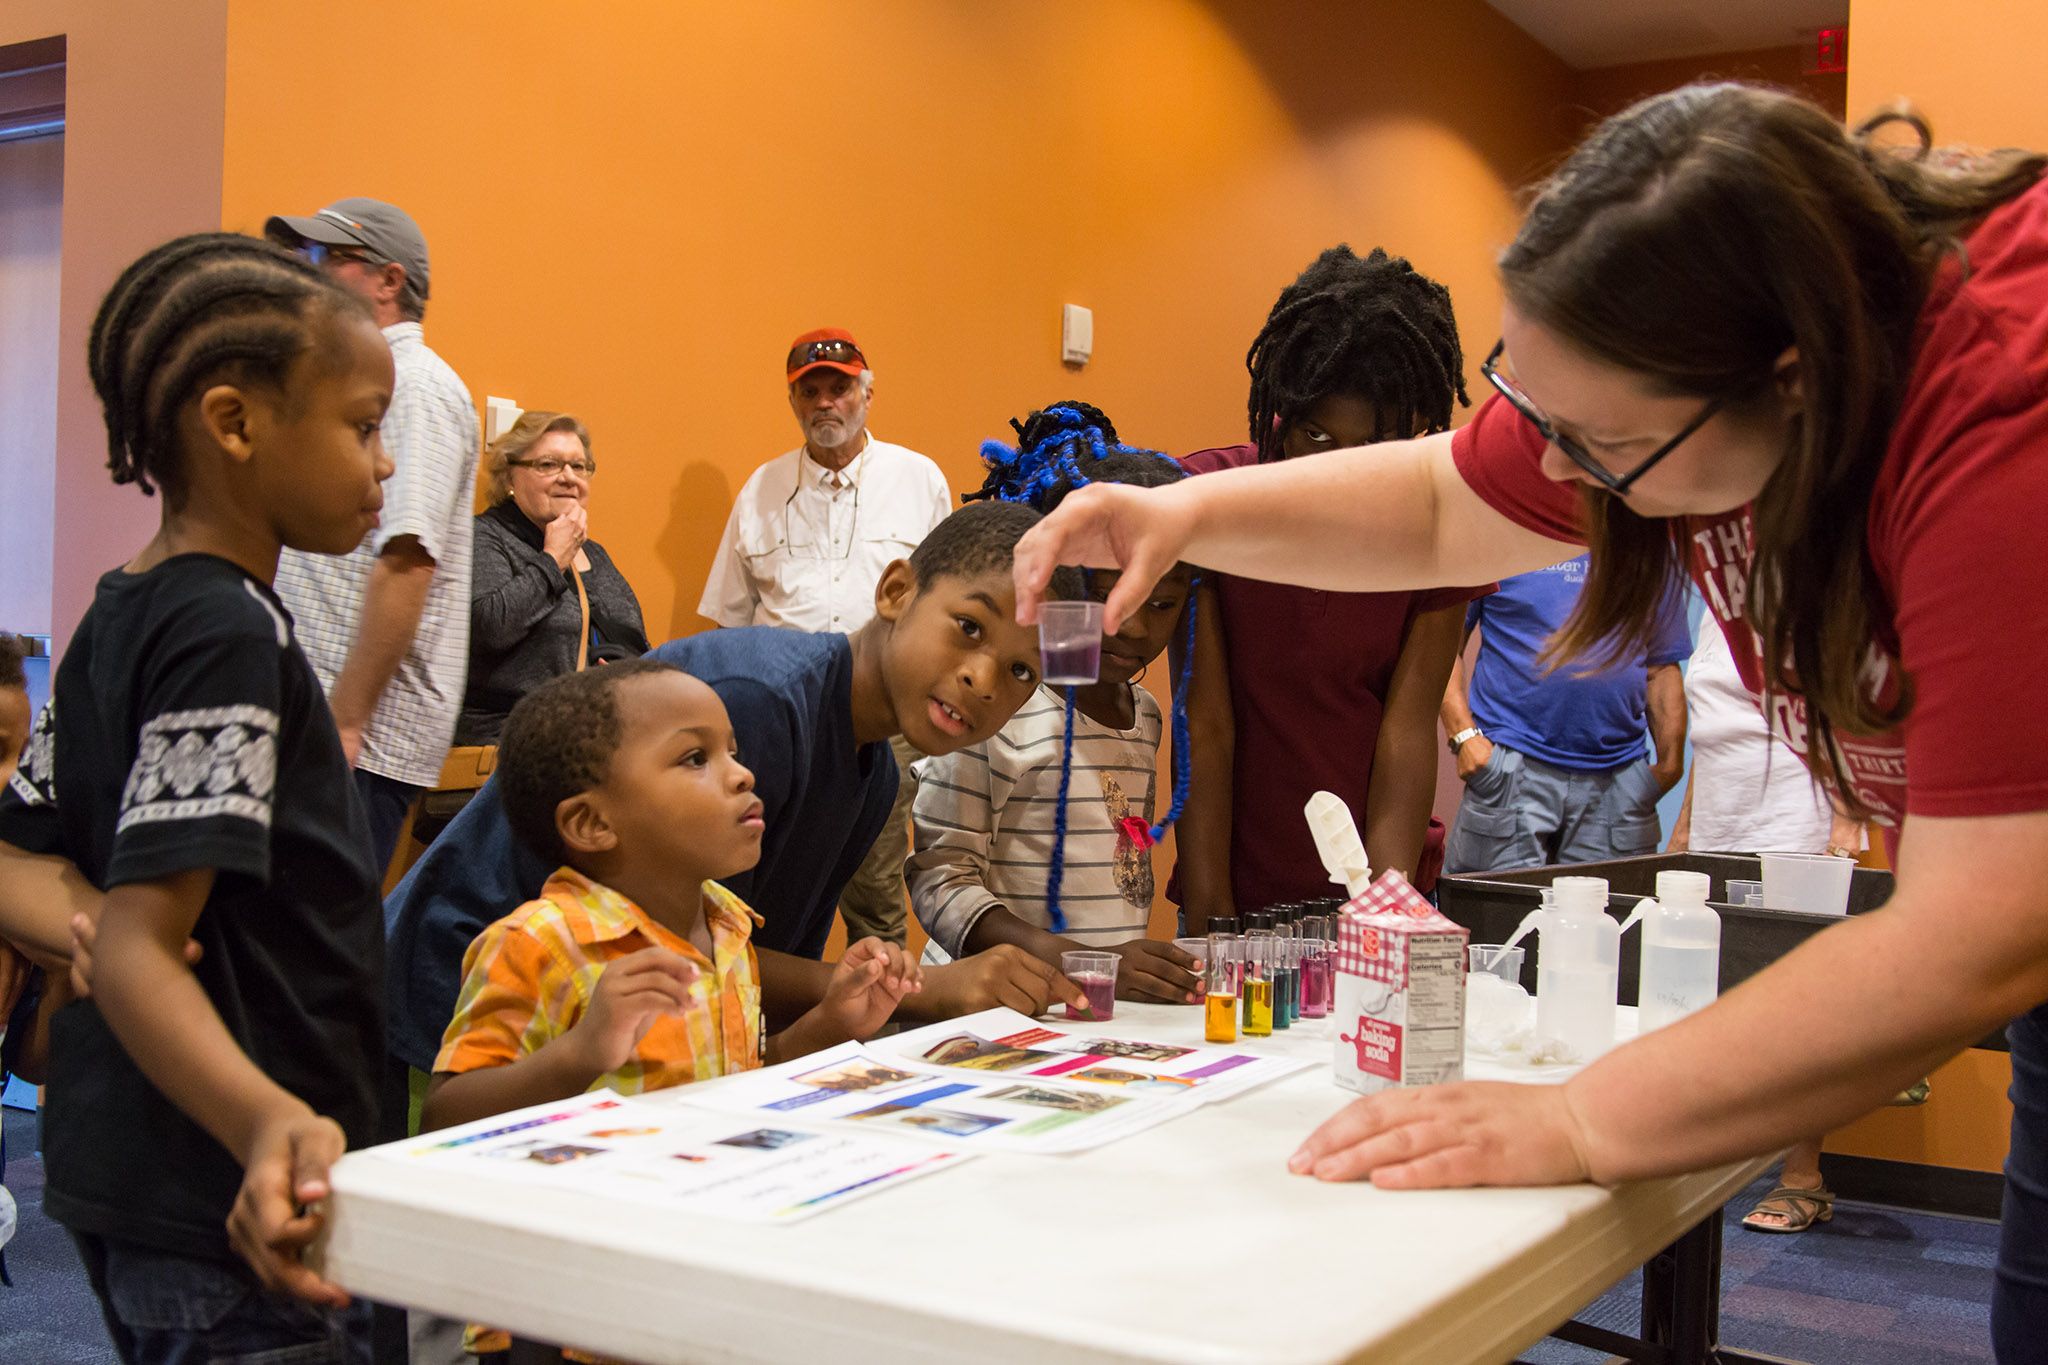 Research Scientist Molly McGath is seen showing young black children a scientific experiment using water colors and small beakers. The children are peering into the glass Molly is holding in front of them.